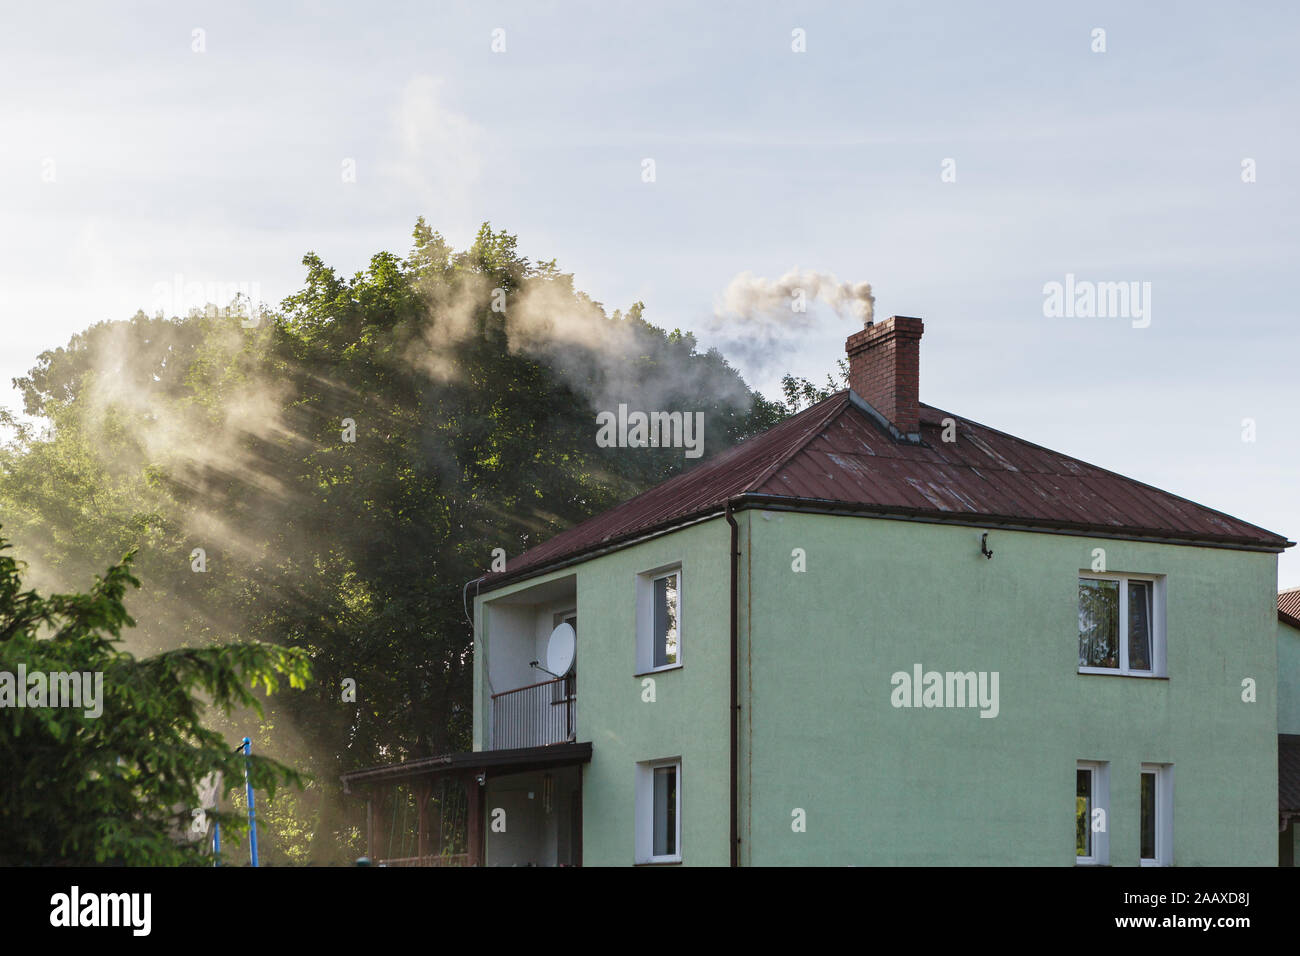 Smoke from chimney polluting air and causing smog Stock Photo